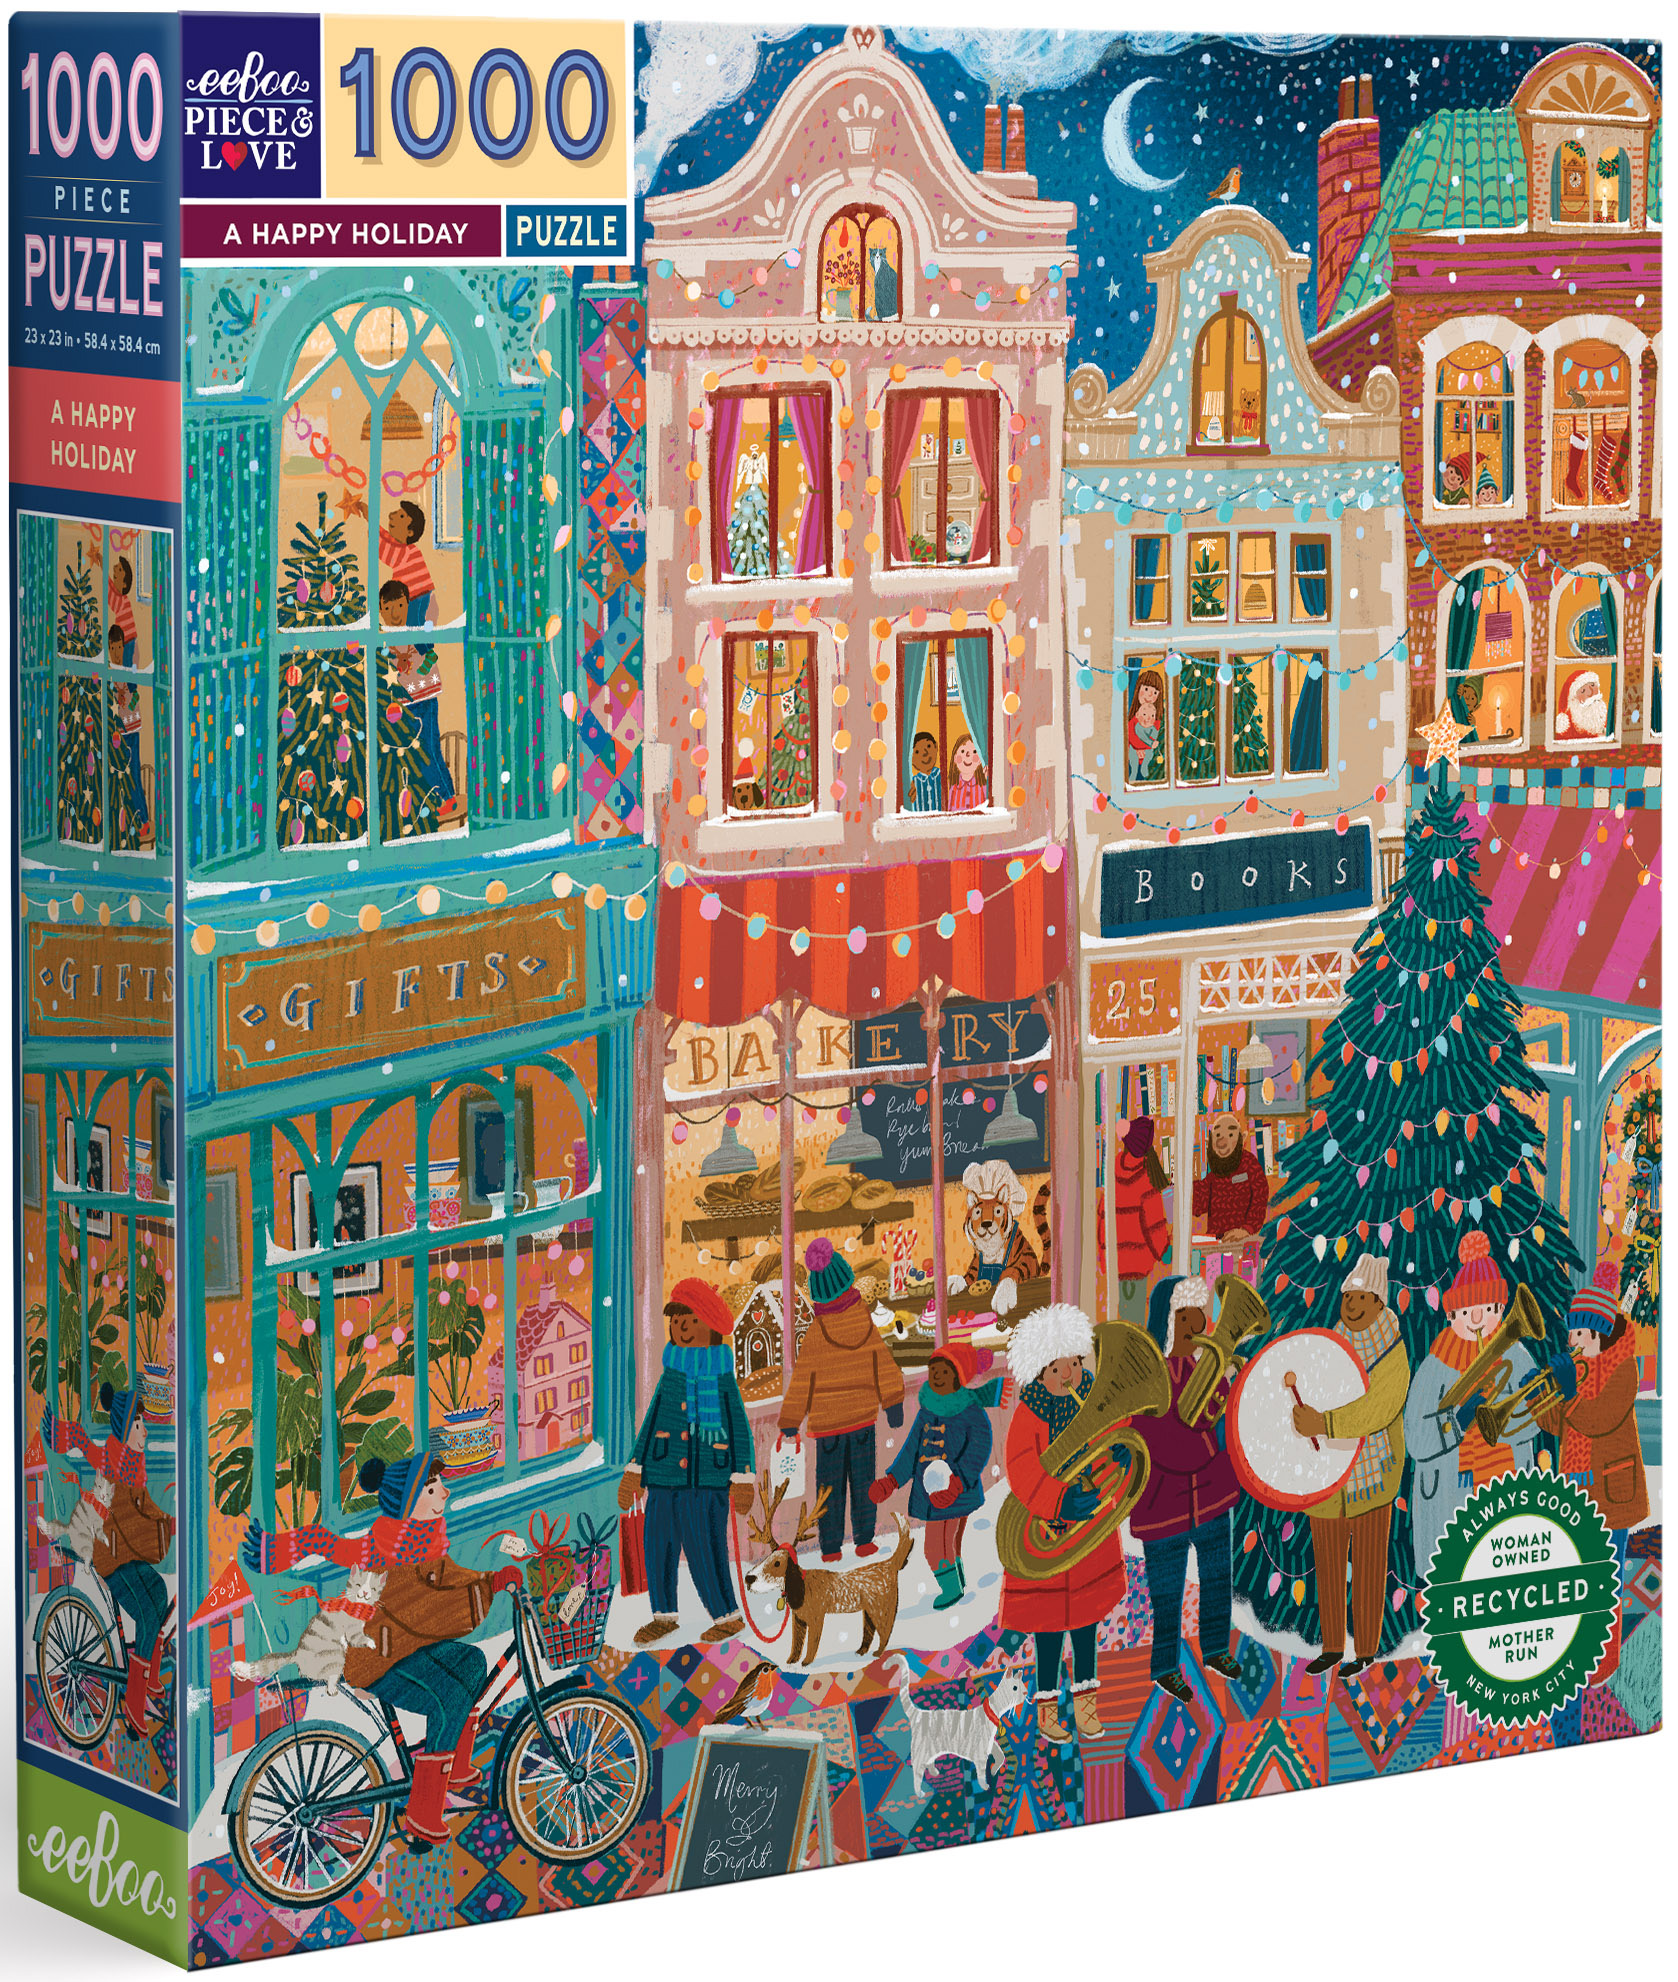 A Happy Holiday People Jigsaw Puzzle